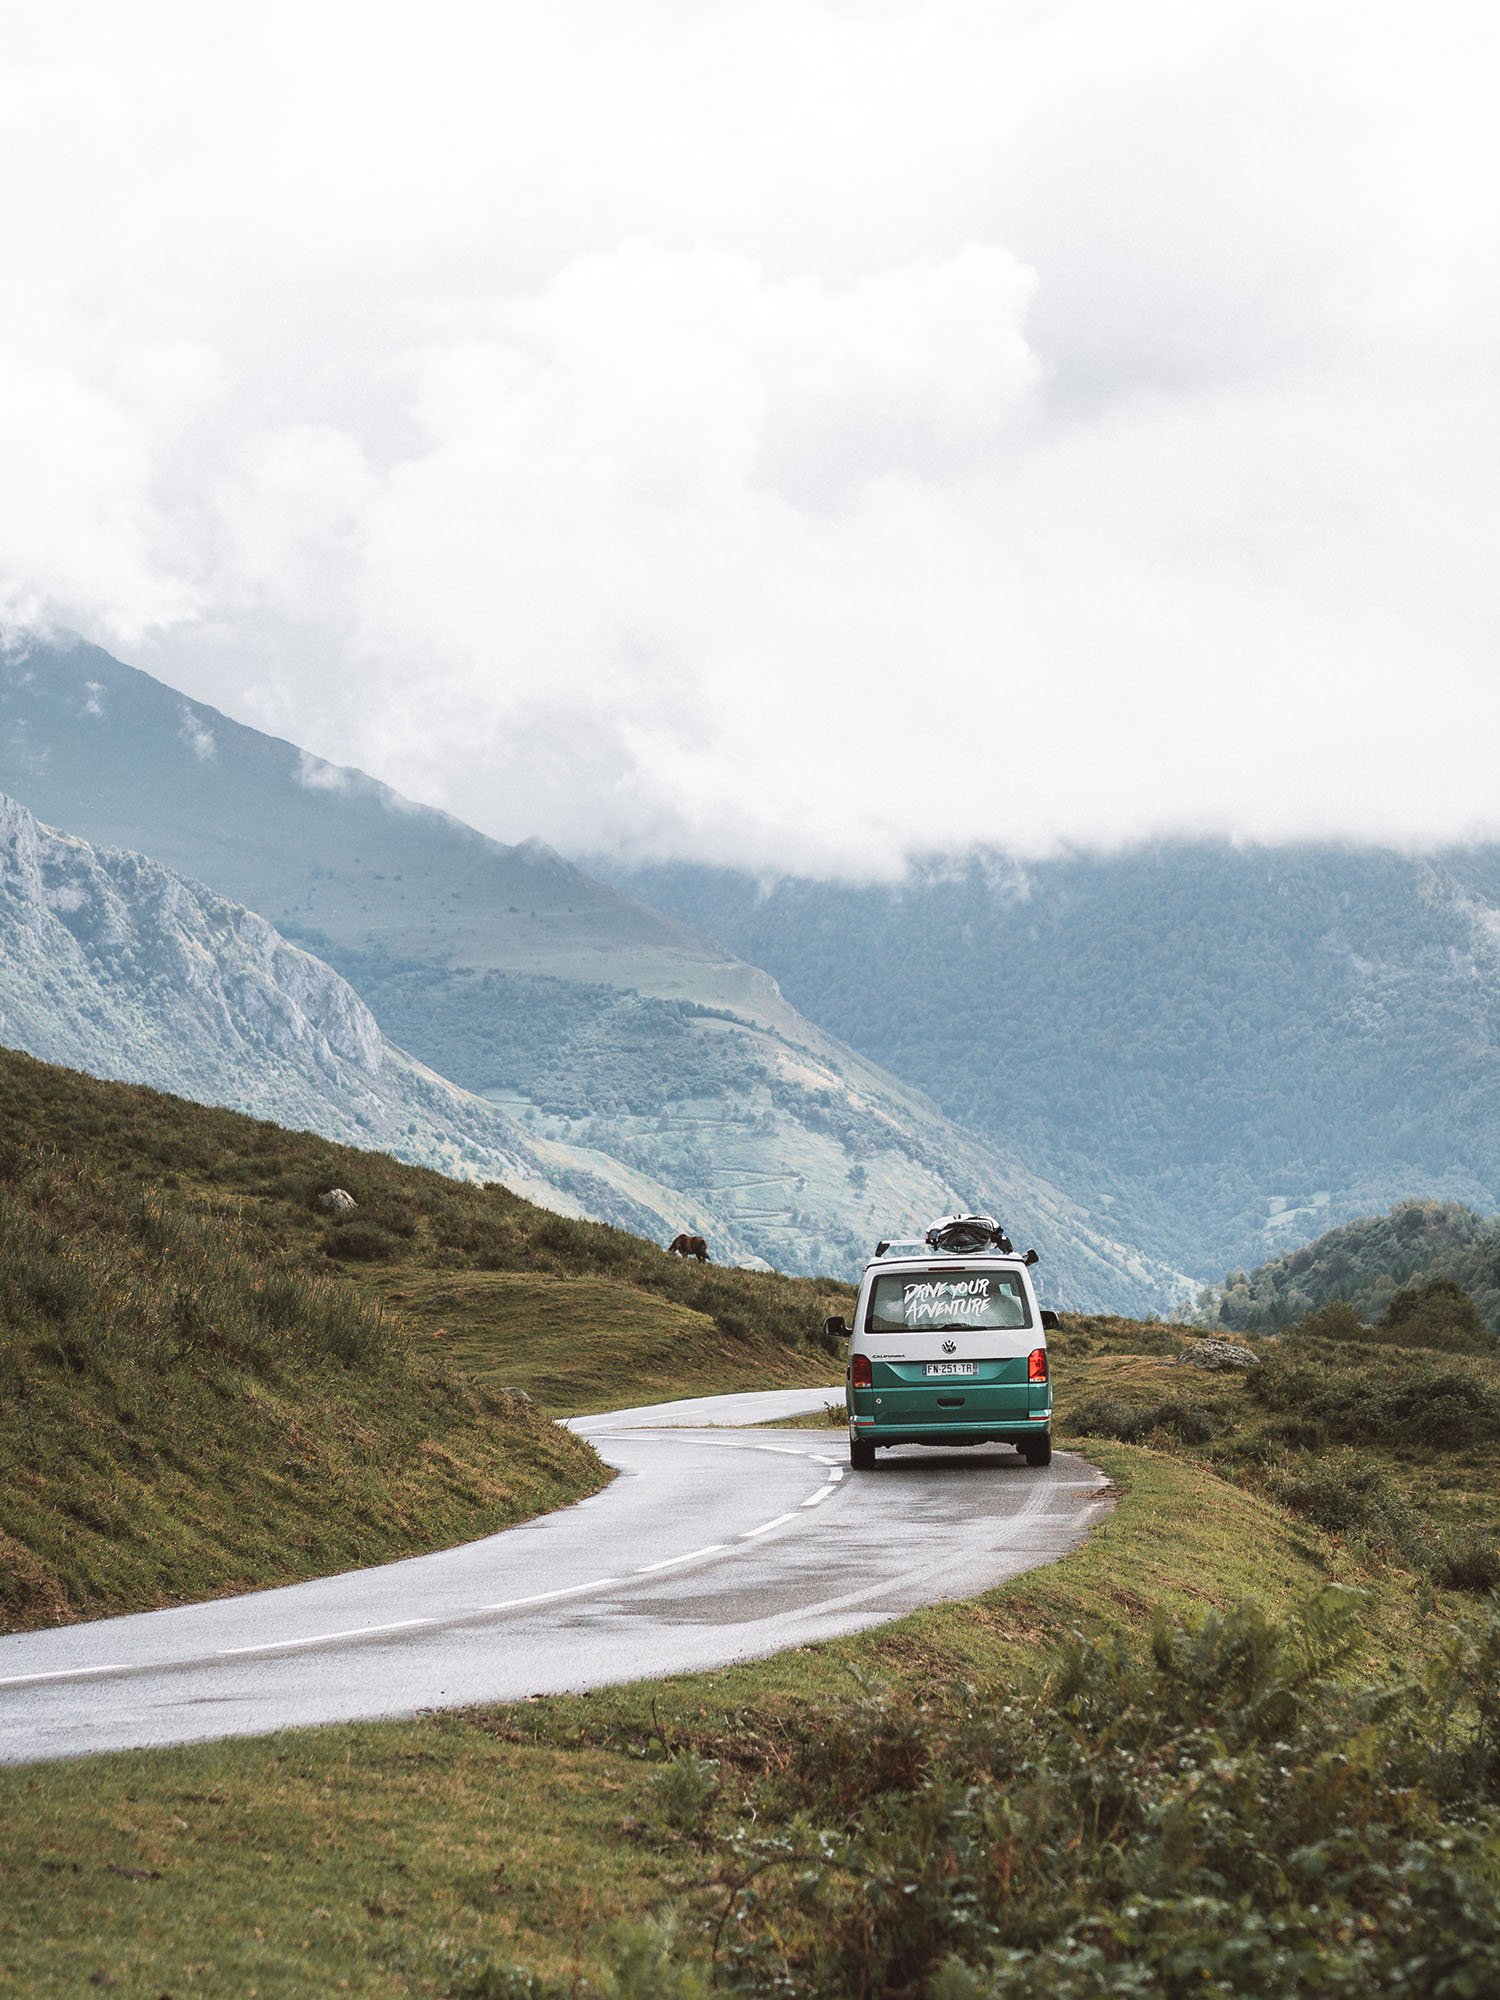 Road trip in France: Budget hire campervan out